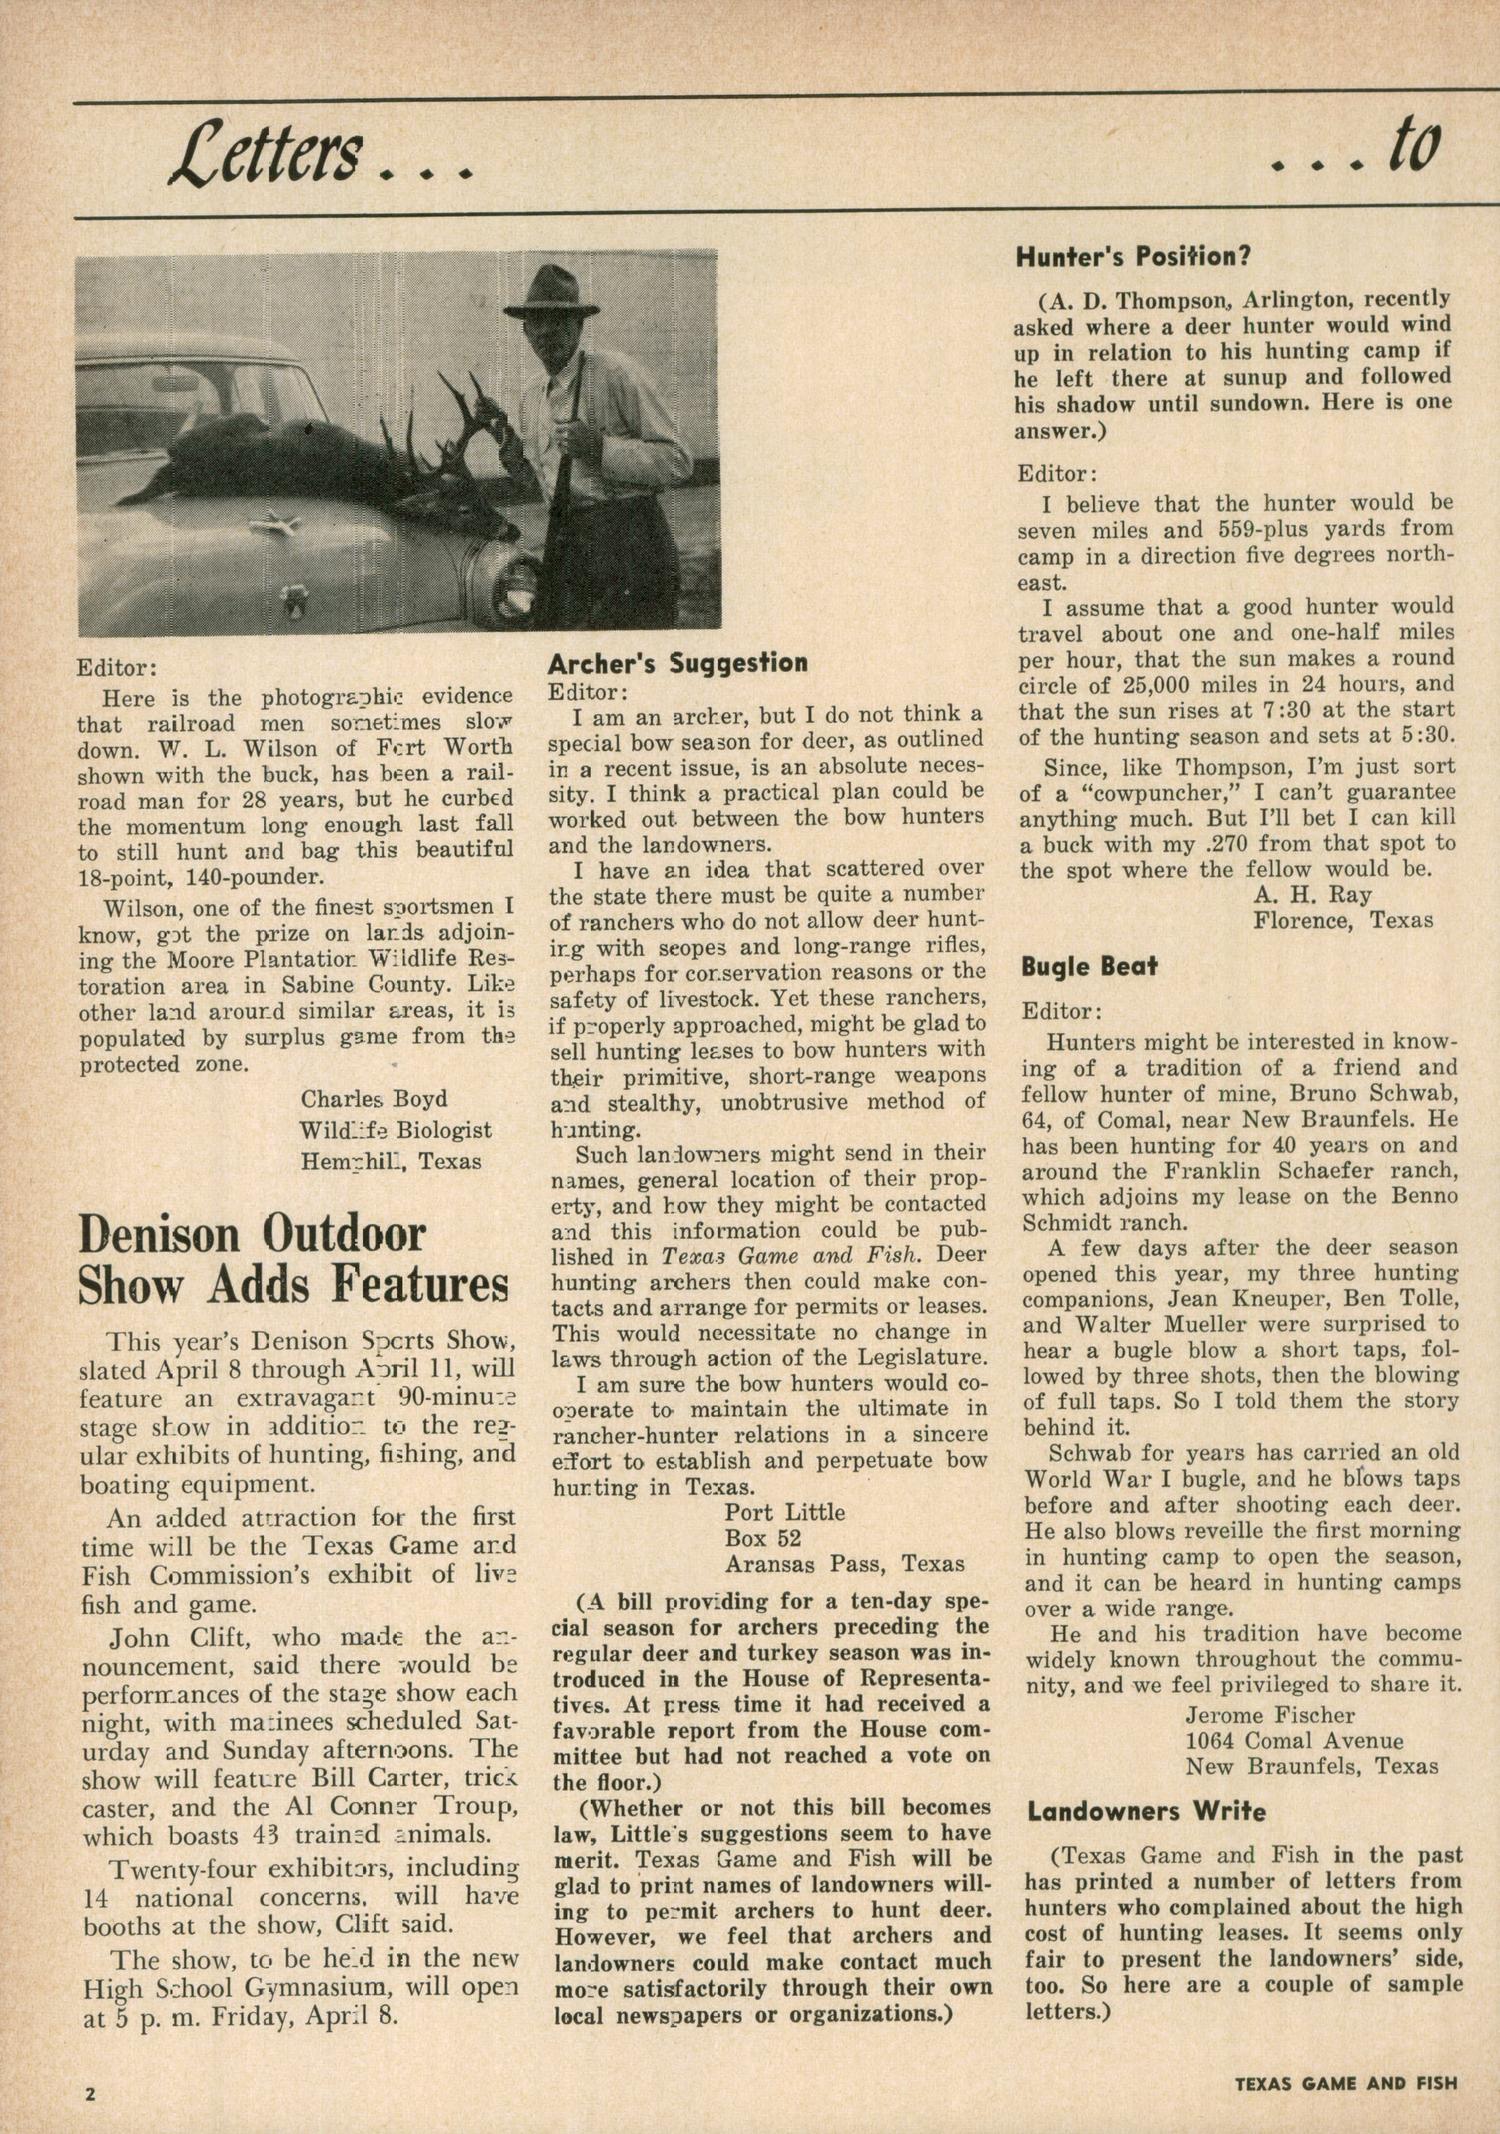 Texas Game and Fish, Volume 13, Number 4, April 1955
                                                
                                                    2
                                                